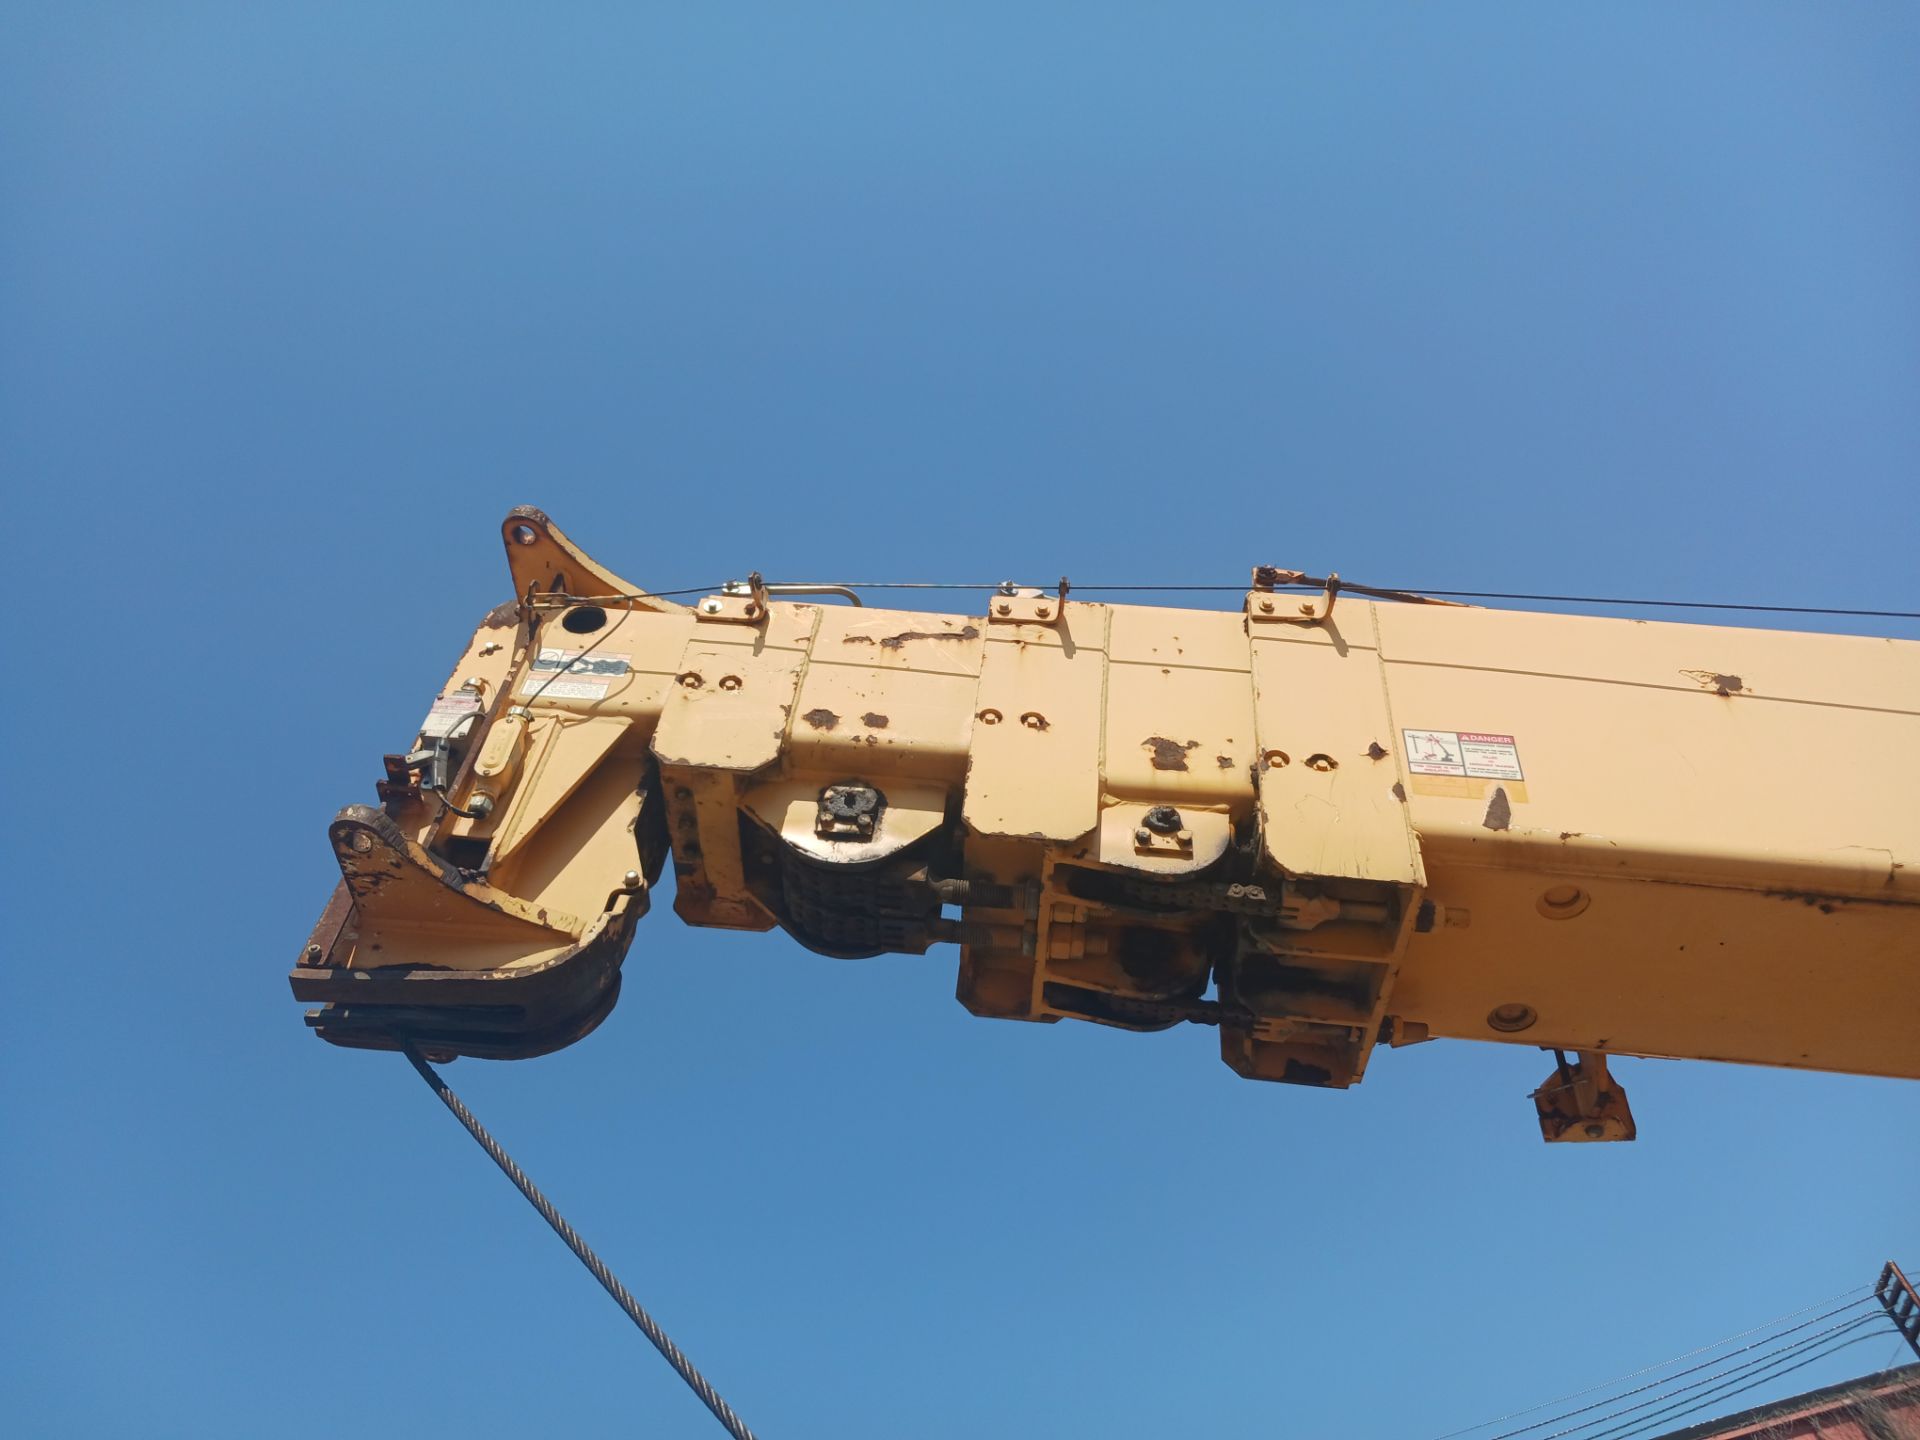 Broderson IC-200-3F Carry Deck 15 Ton Crane - Image 12 of 13